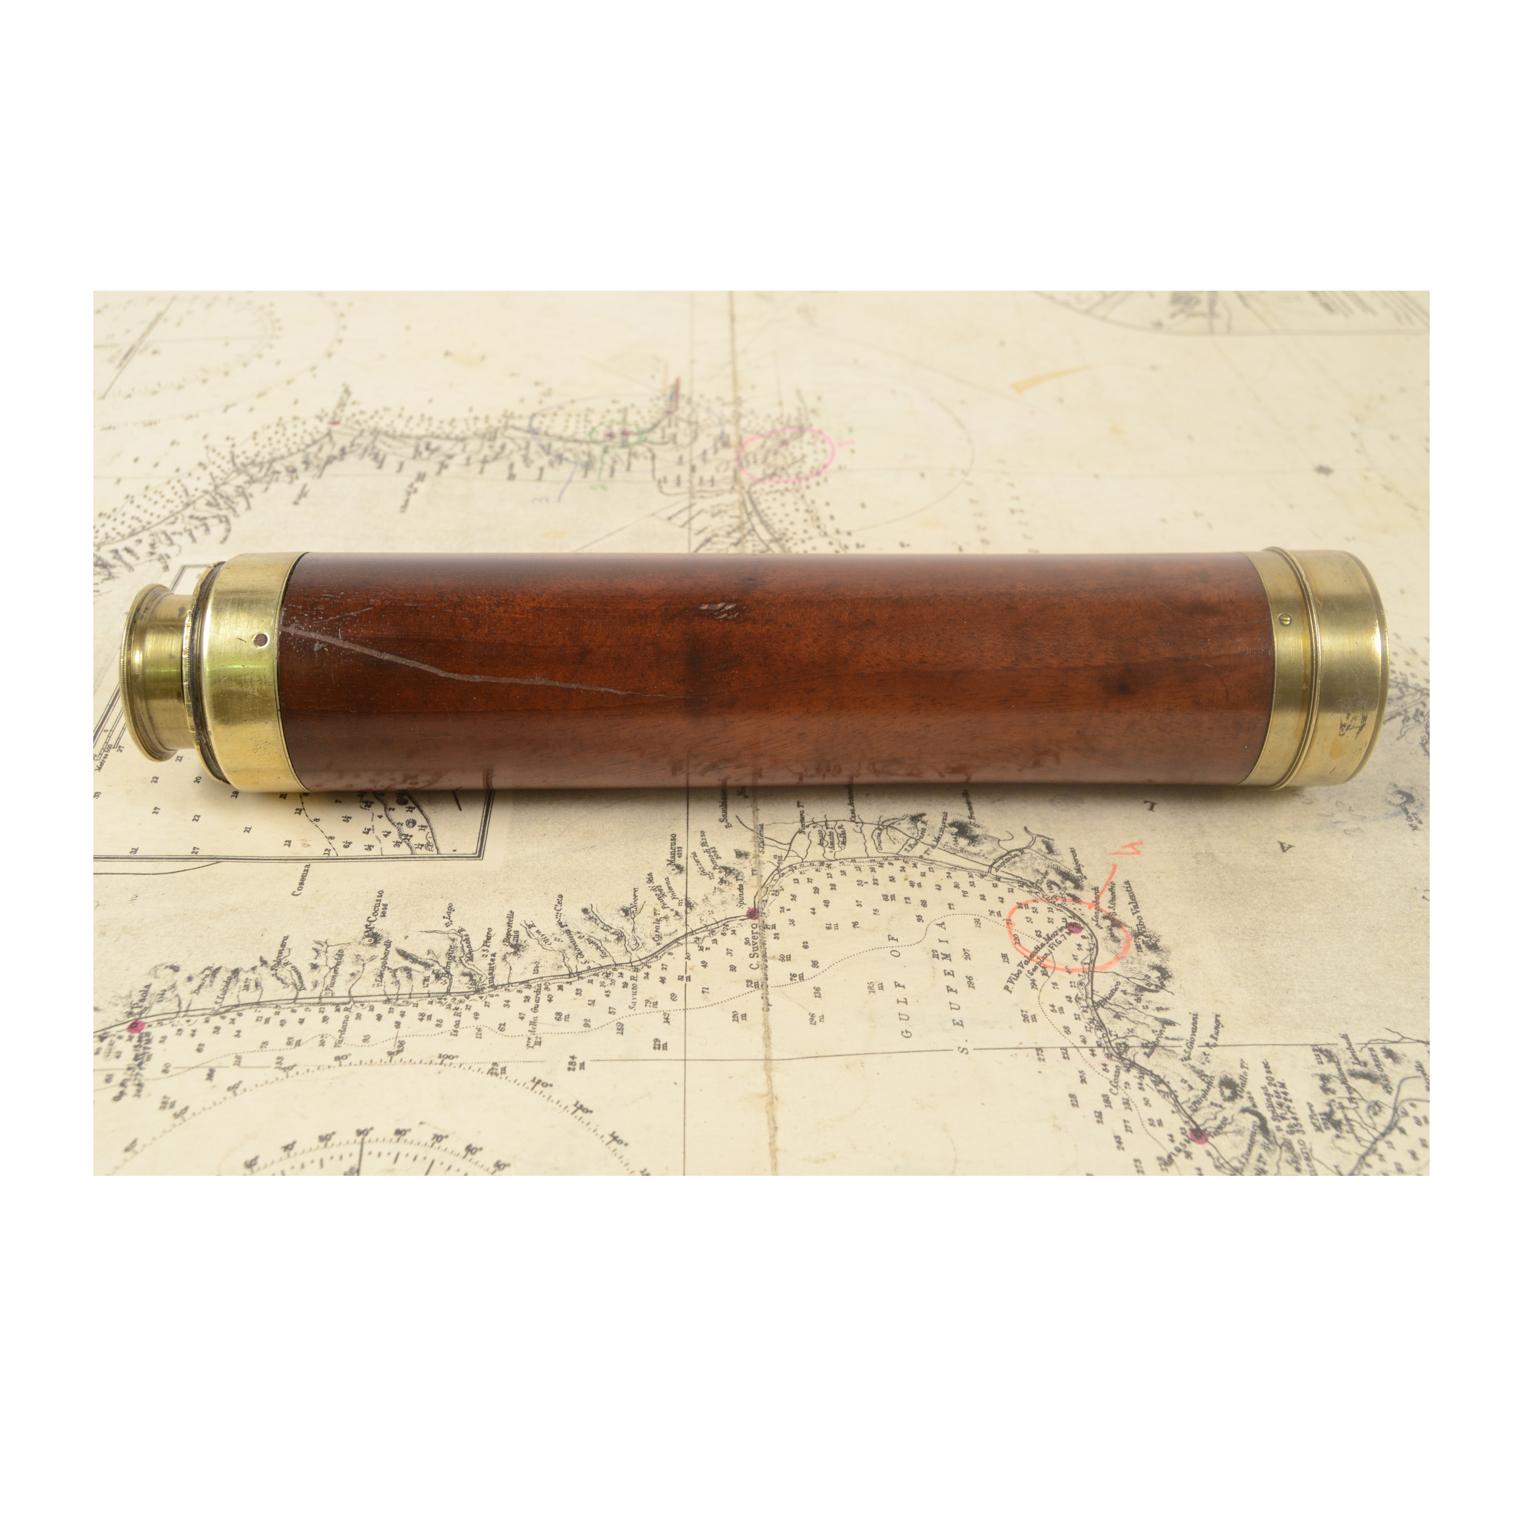 Early 19th Century 19th Century Antique Brass Telescope with Mahogany Handle English Manufacture